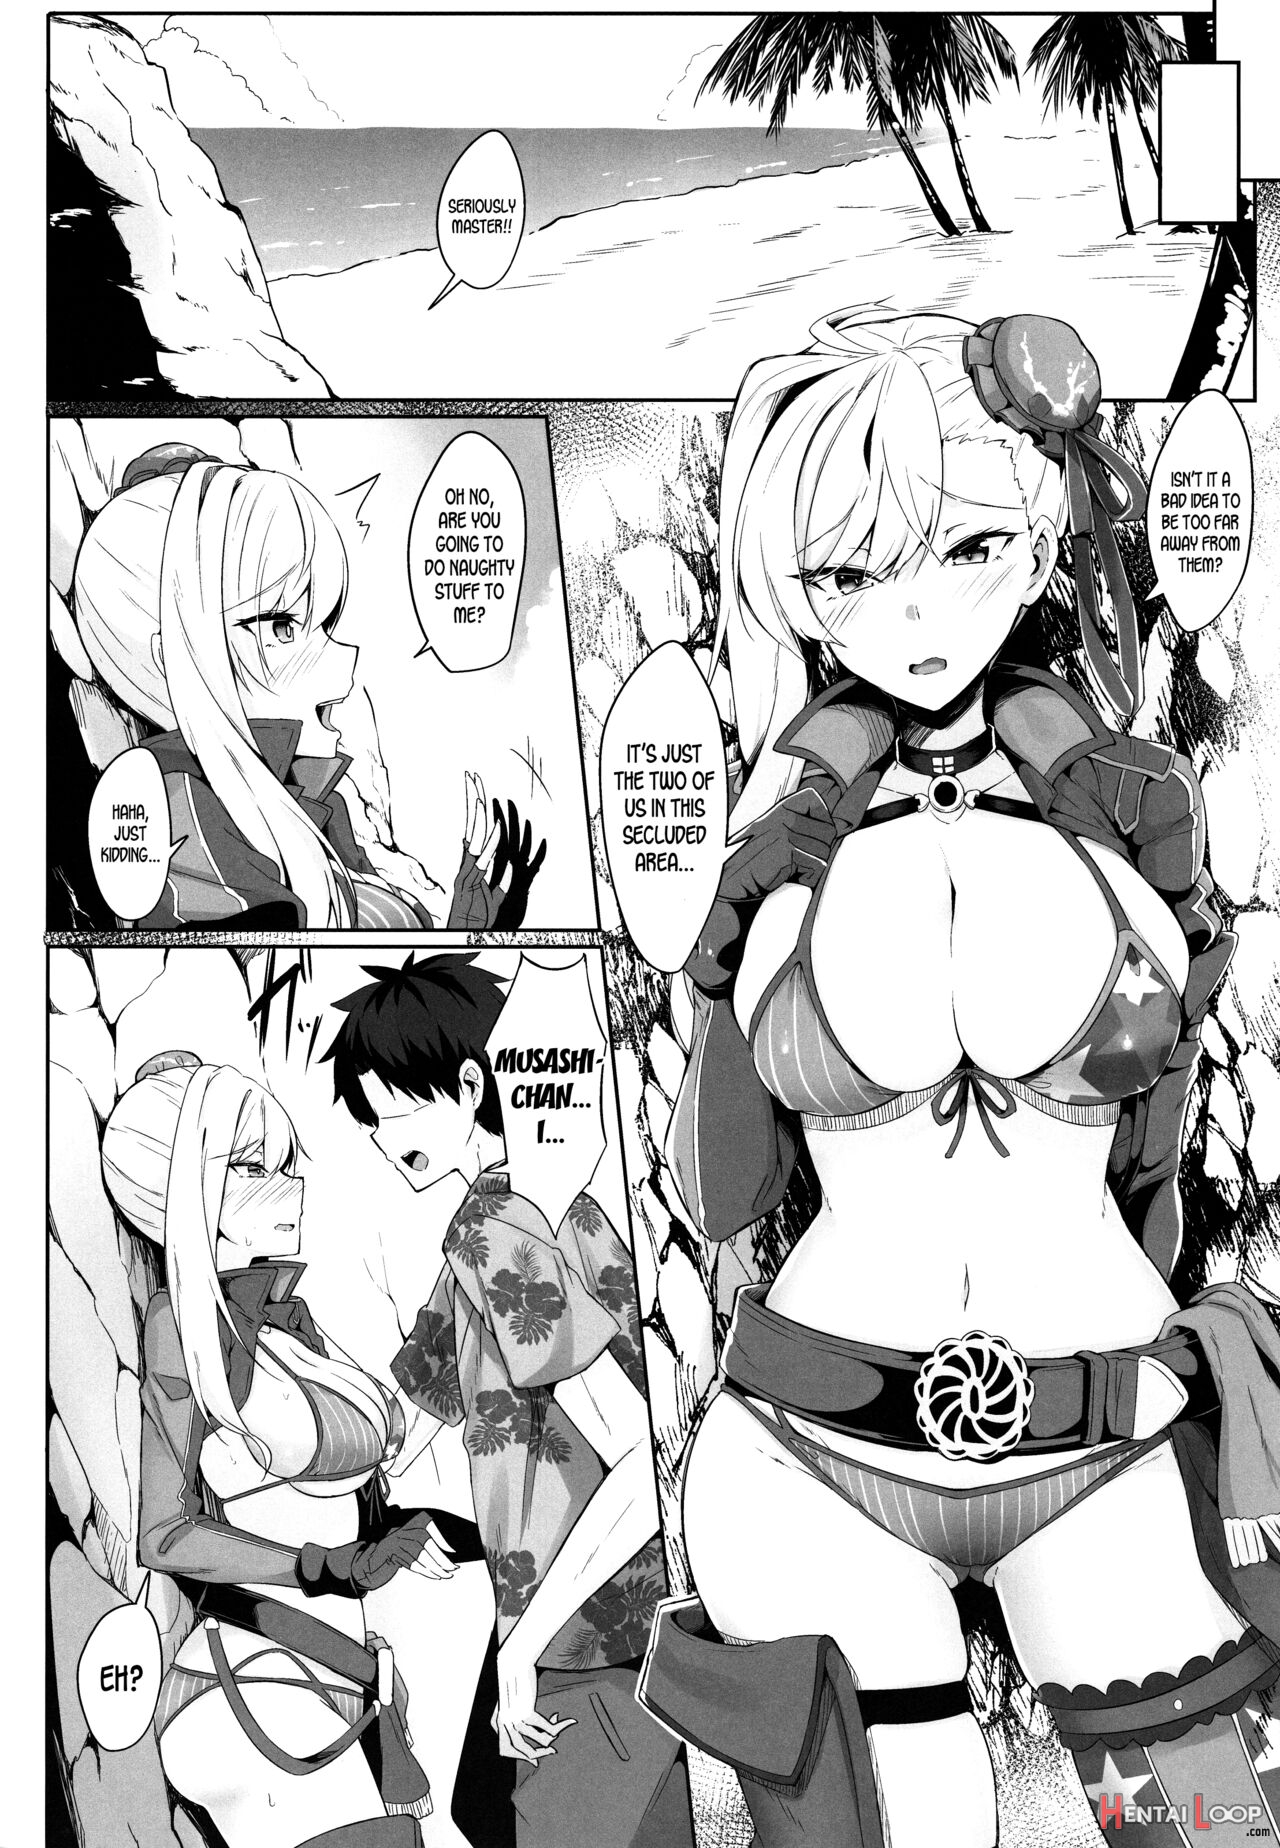 It's All Musashi-chan's Fault page 7